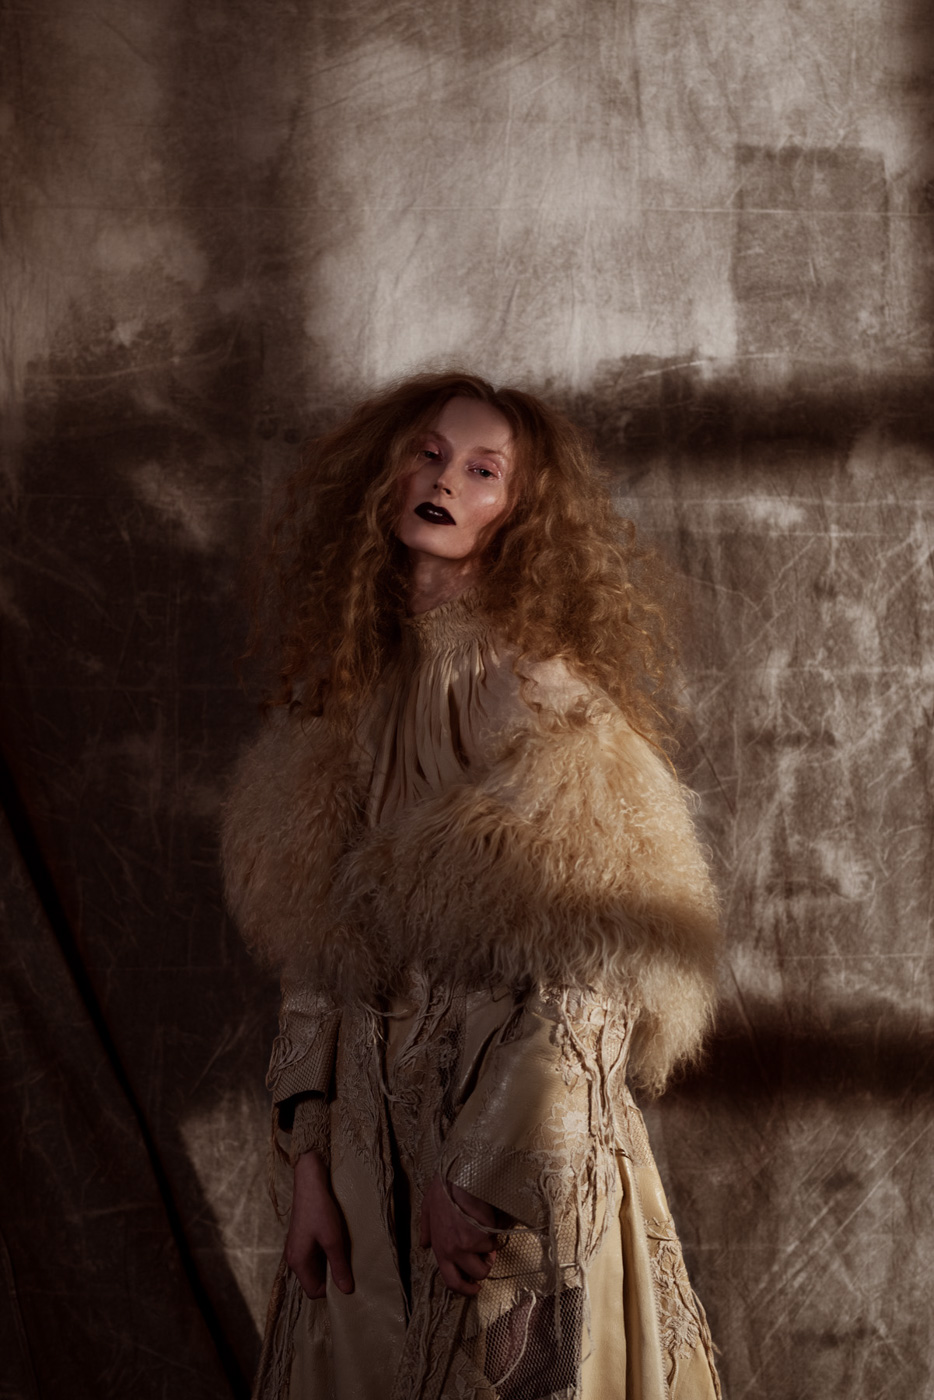 Dramatic_fashion_editorial_portrait_of_woman_with_curly_hair_wearing_beige_fur_and_leather_jacket_on_grey_background_photographed_by_Sara_Lehtomaa